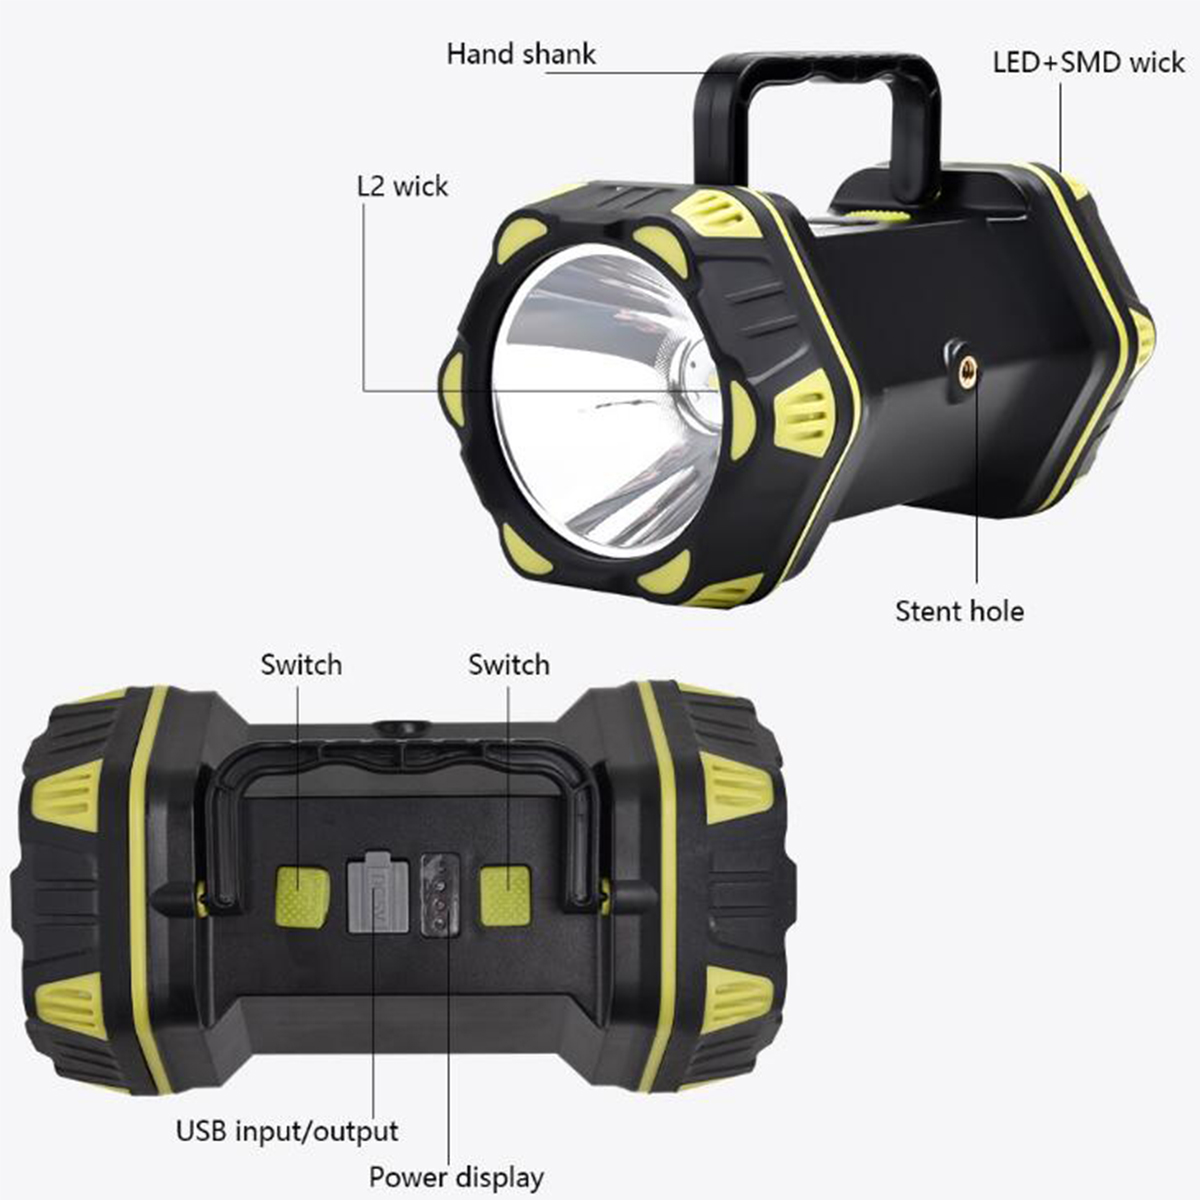 750LM-Portable-Double-headed-LED-Searchlight-Outdoor-Waterproof-Flashlight-Rechargeable-Mountaineeri-1935150-8